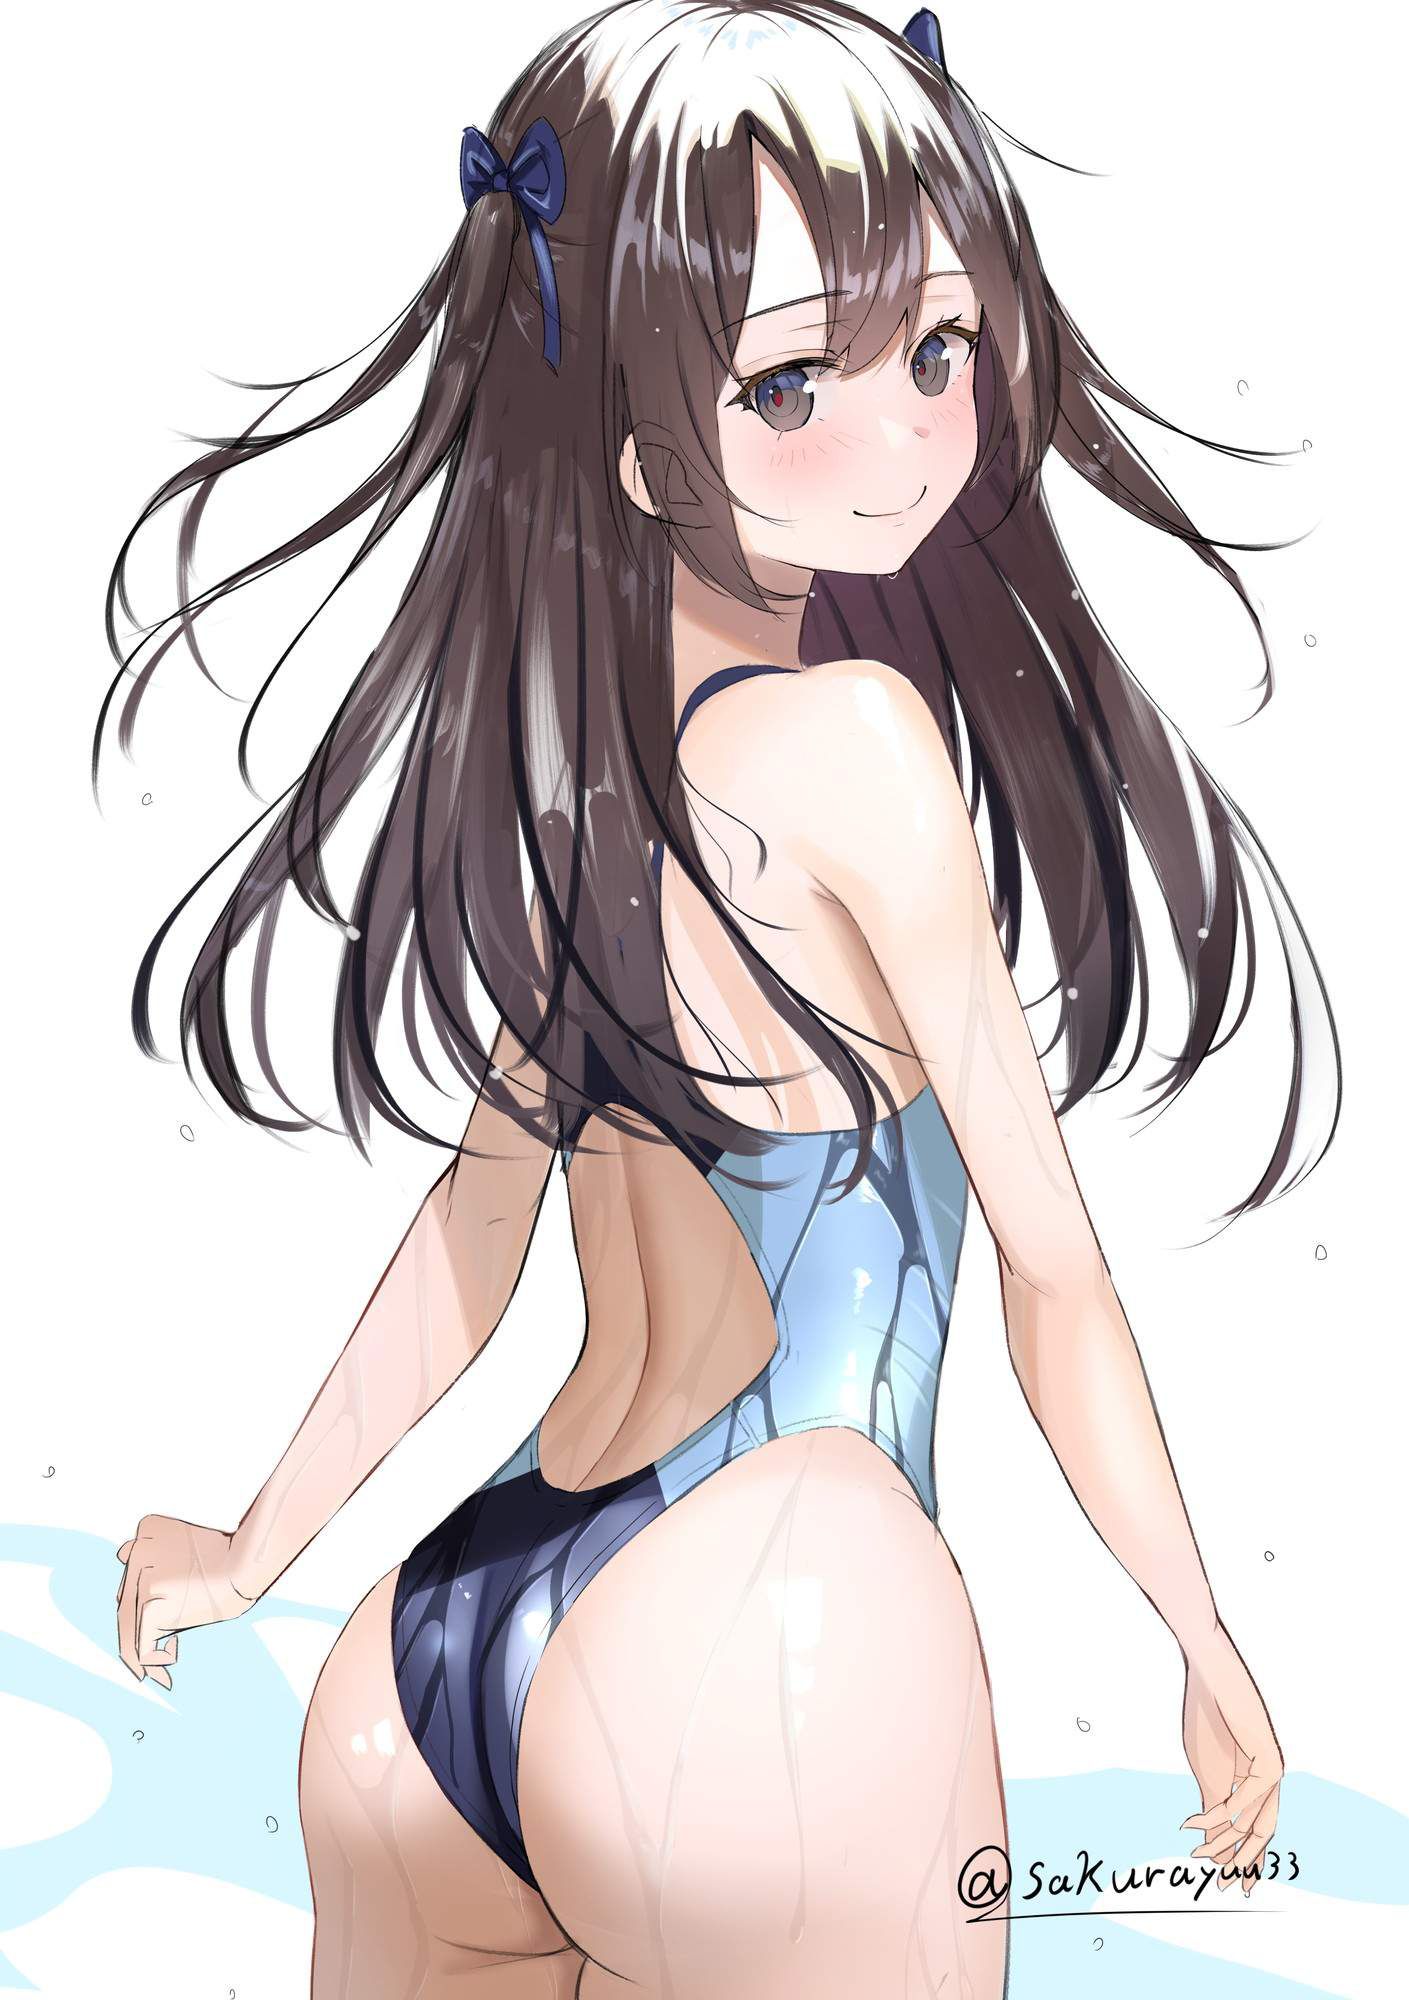 I'm going to put up an erotic cute image of a swimsuit! 14